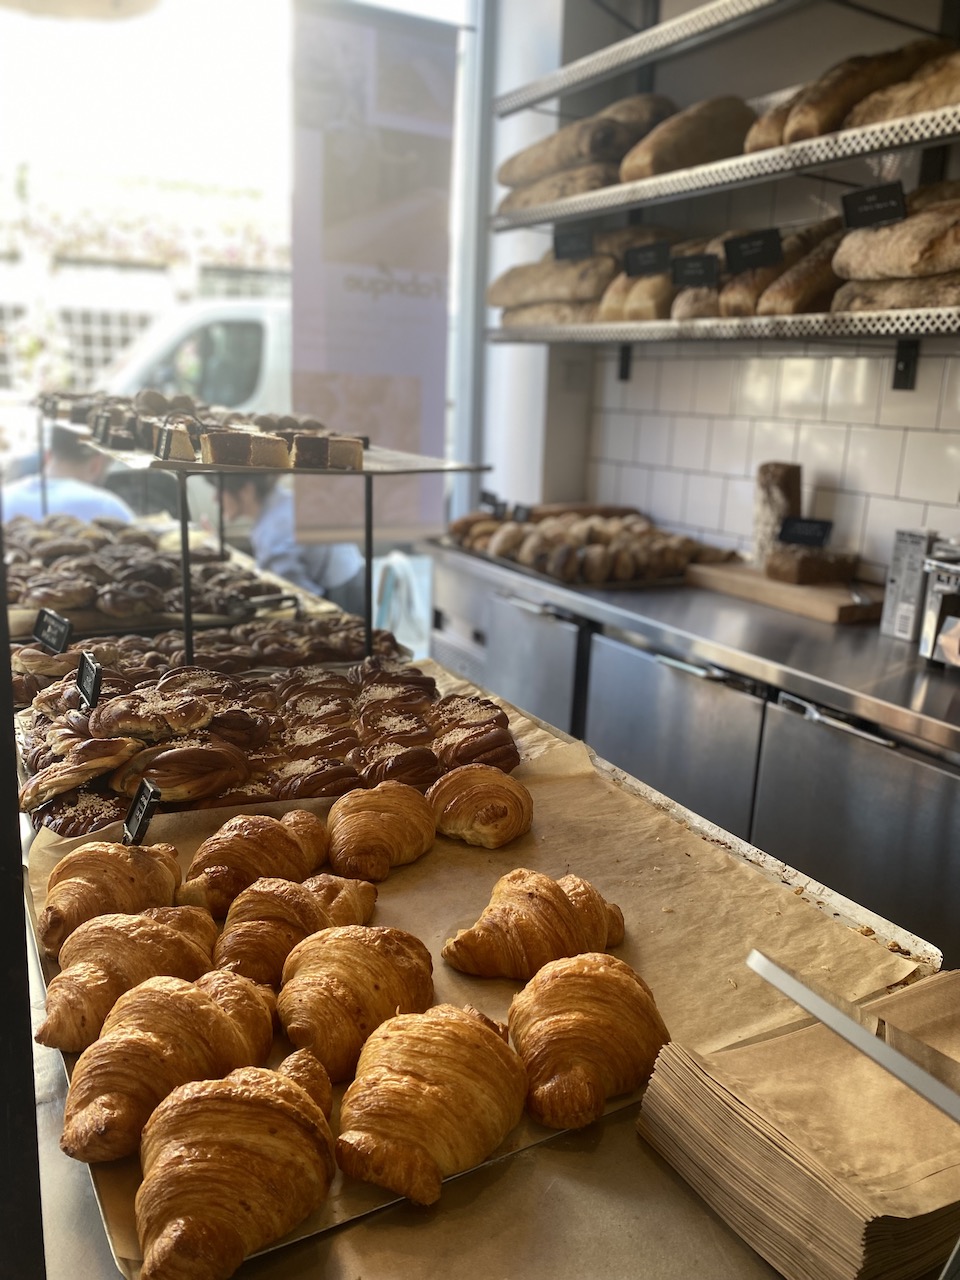 Fabrique opens first café concept within King’s Road lifestyle retailer